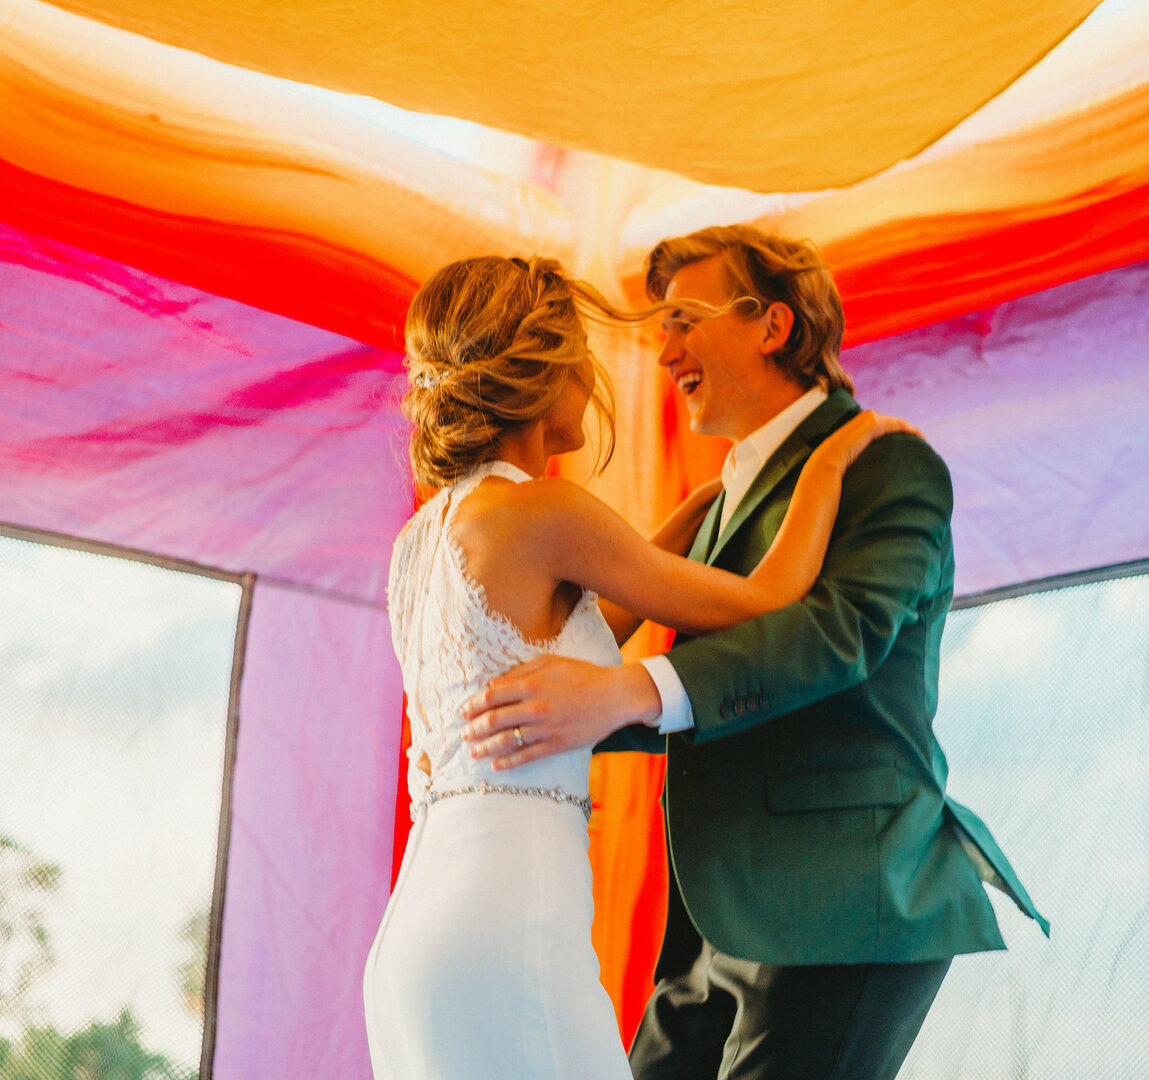 solve your wedding planning dilemmas by doing what makes you happy, like getting a wedding bounce house!